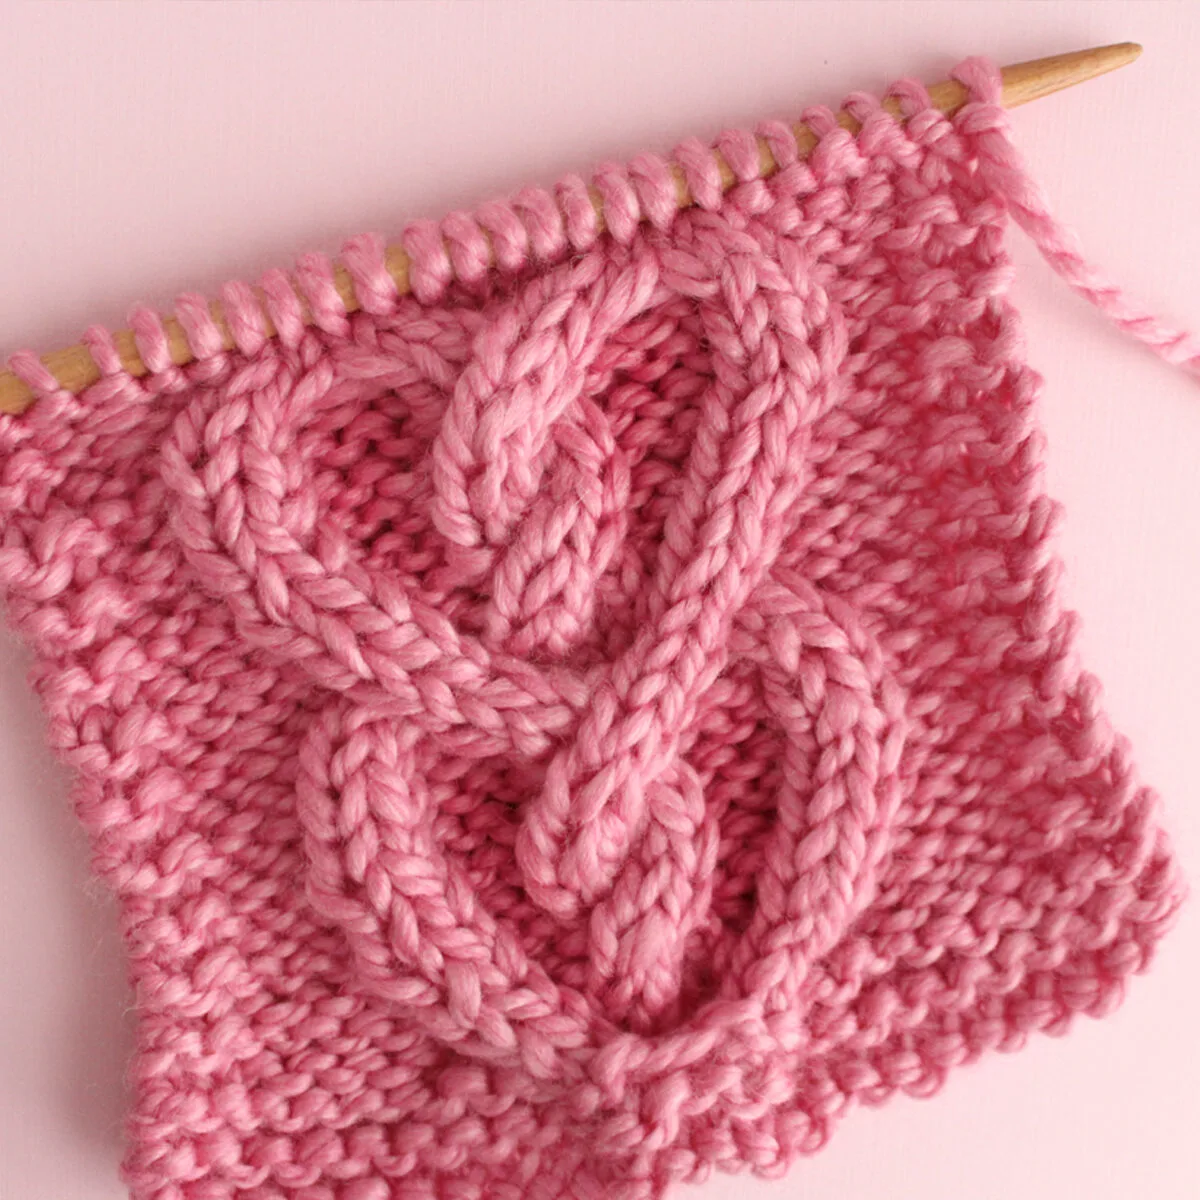 Cable Heart Knitting Pattern Swatch in Pink Yarn